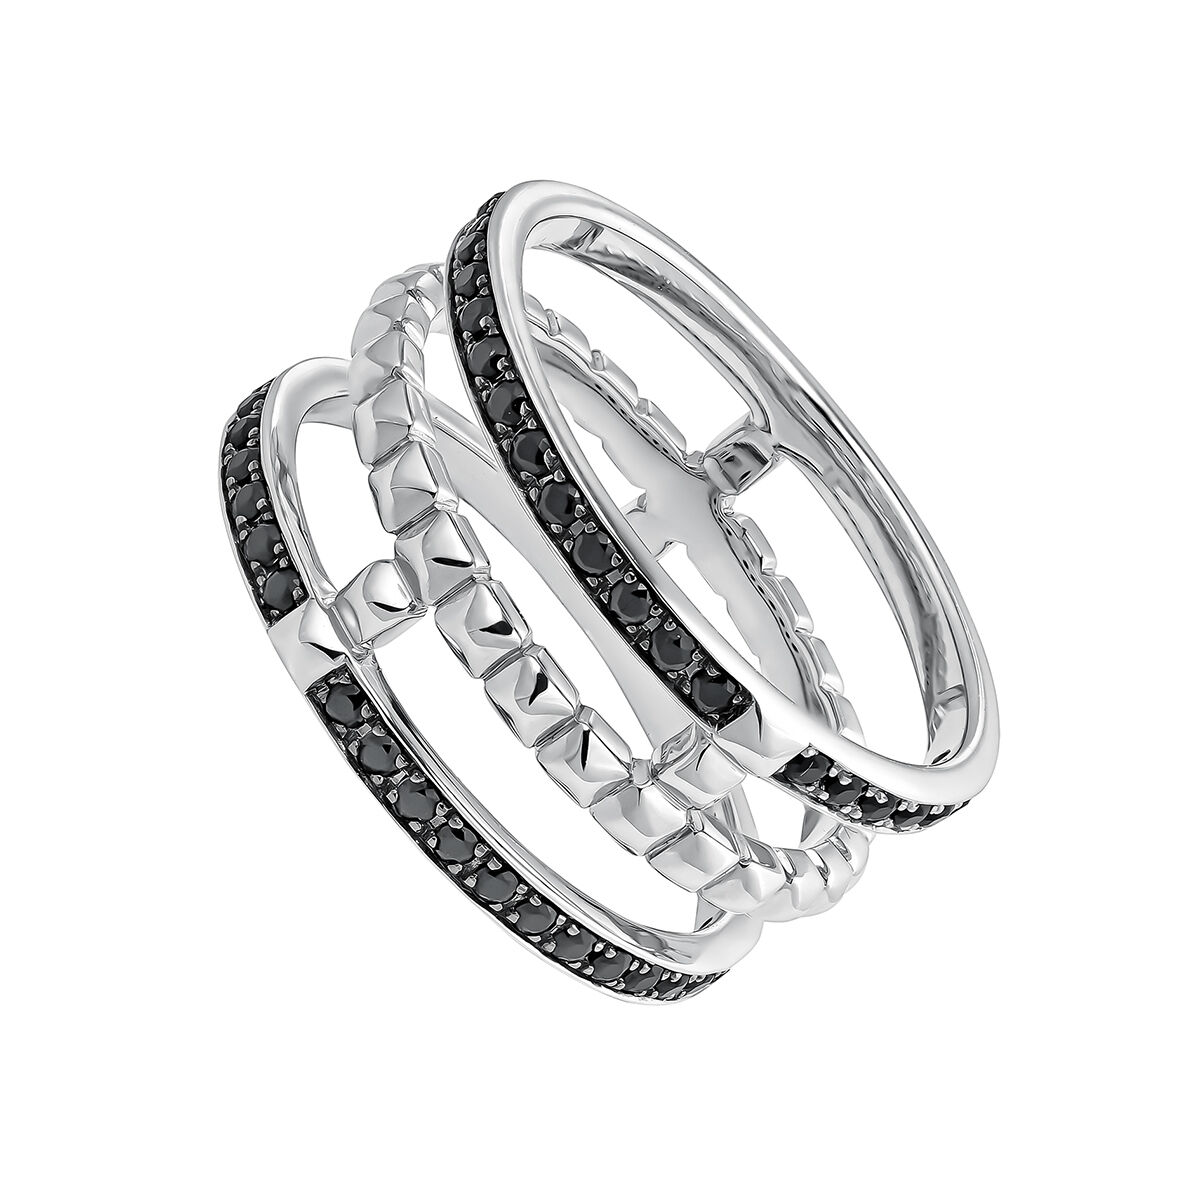 Silver triple ring with raised detail and black spinel gemstones , J04905-01-BSN, hi-res